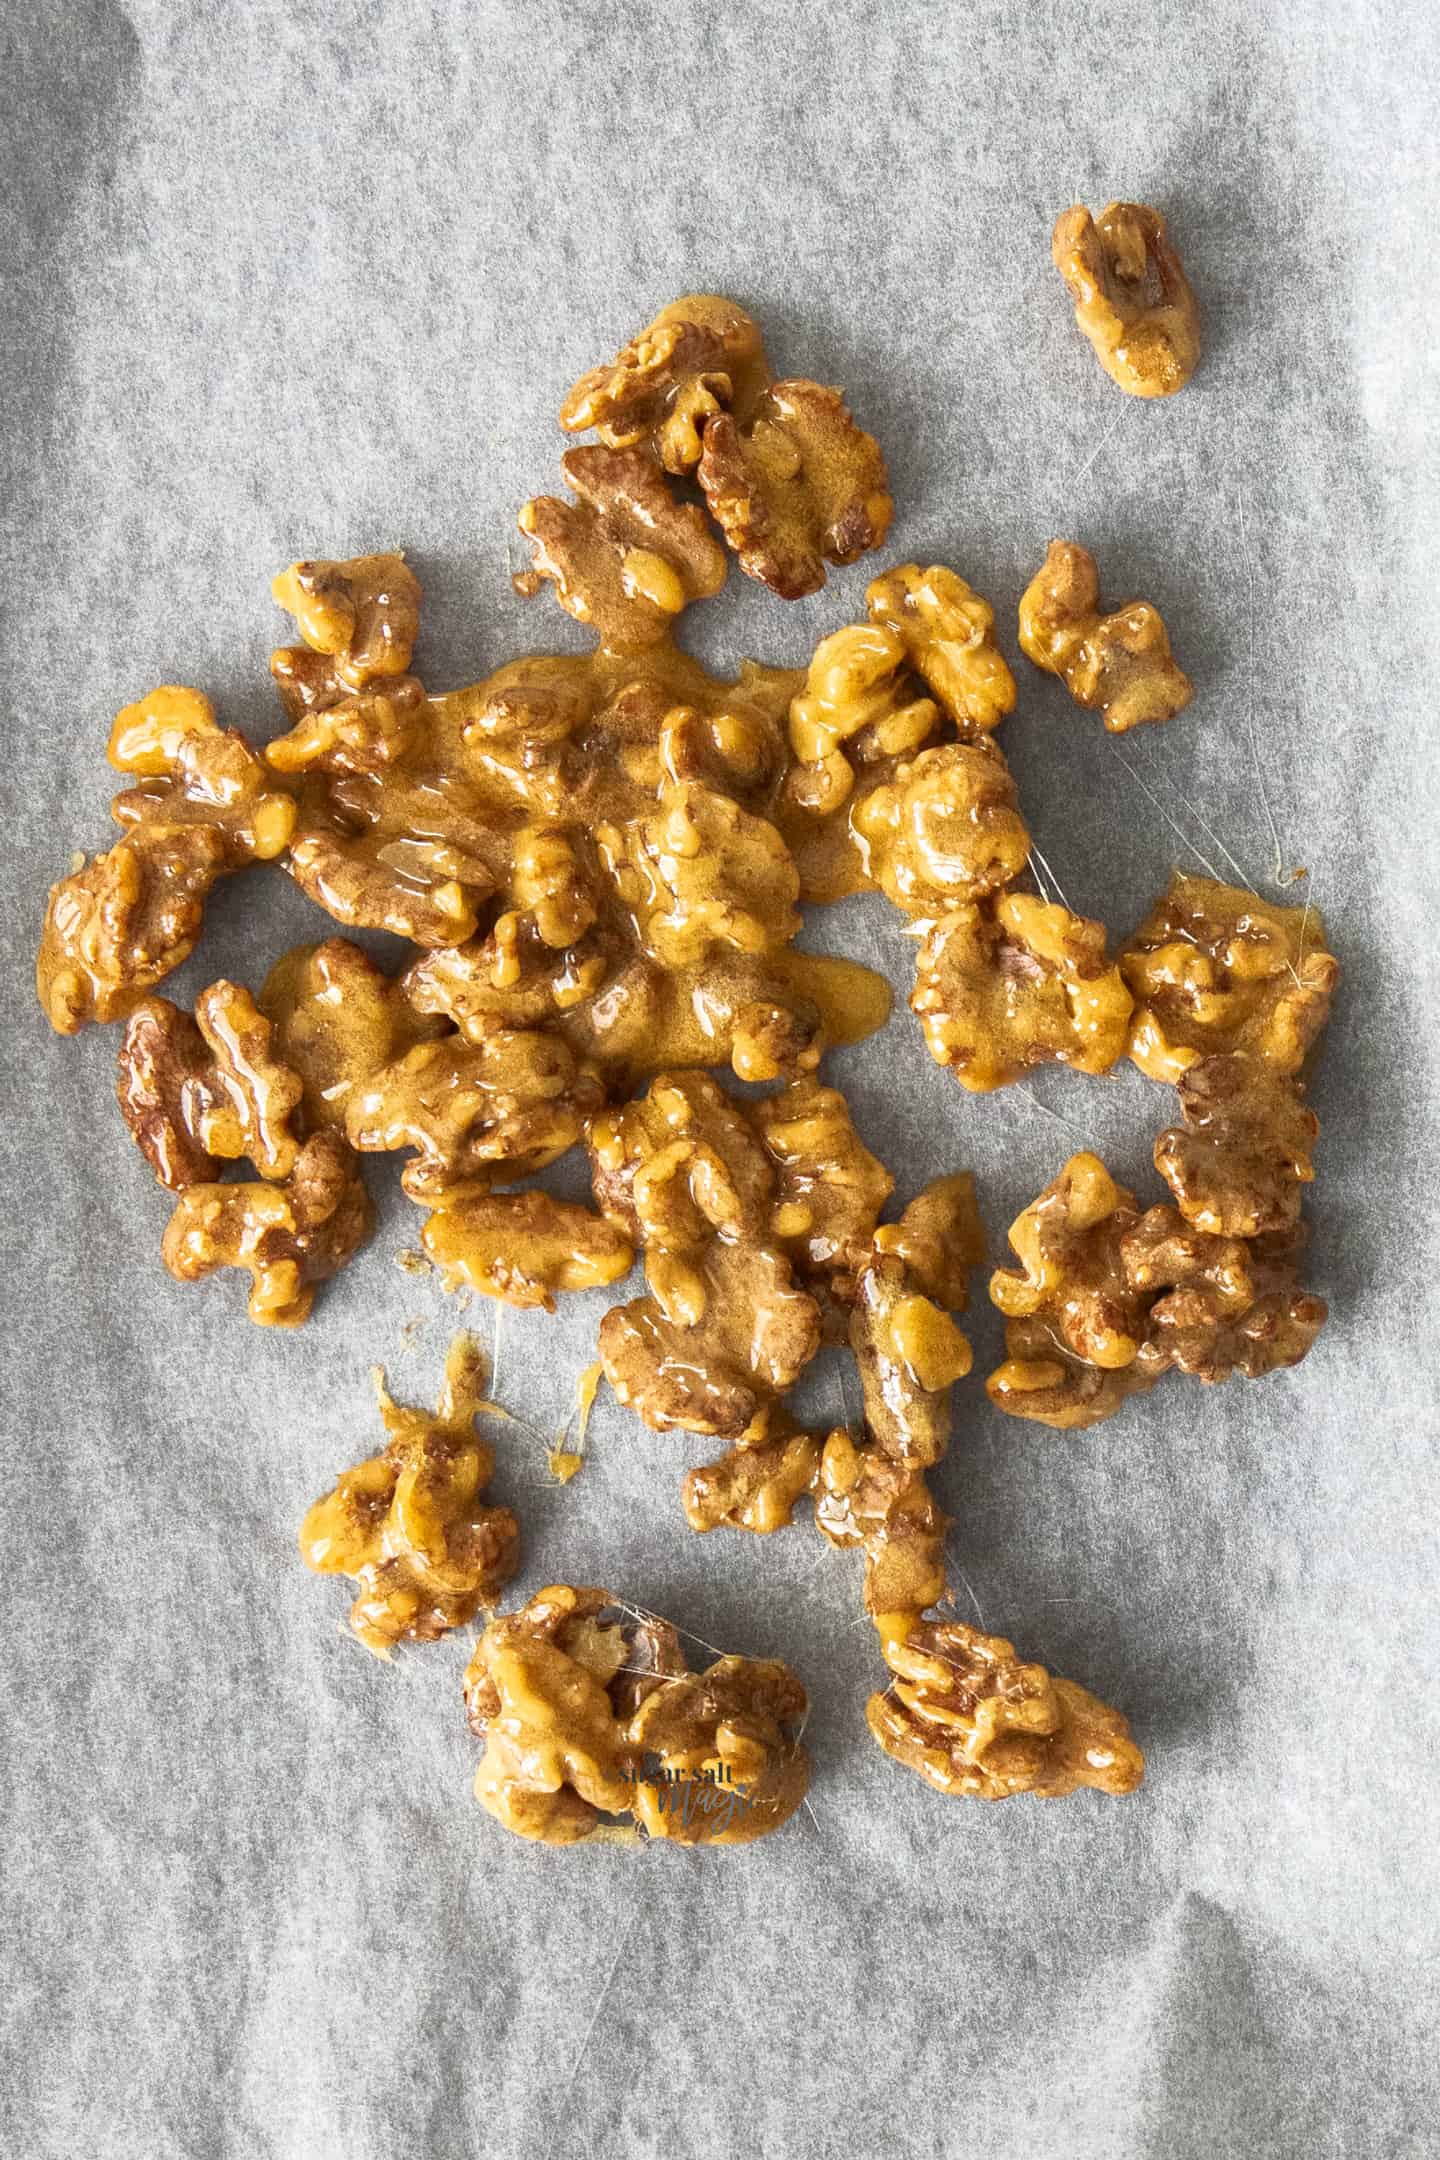 A batch of candied walnuts on a sheet of baking paper.